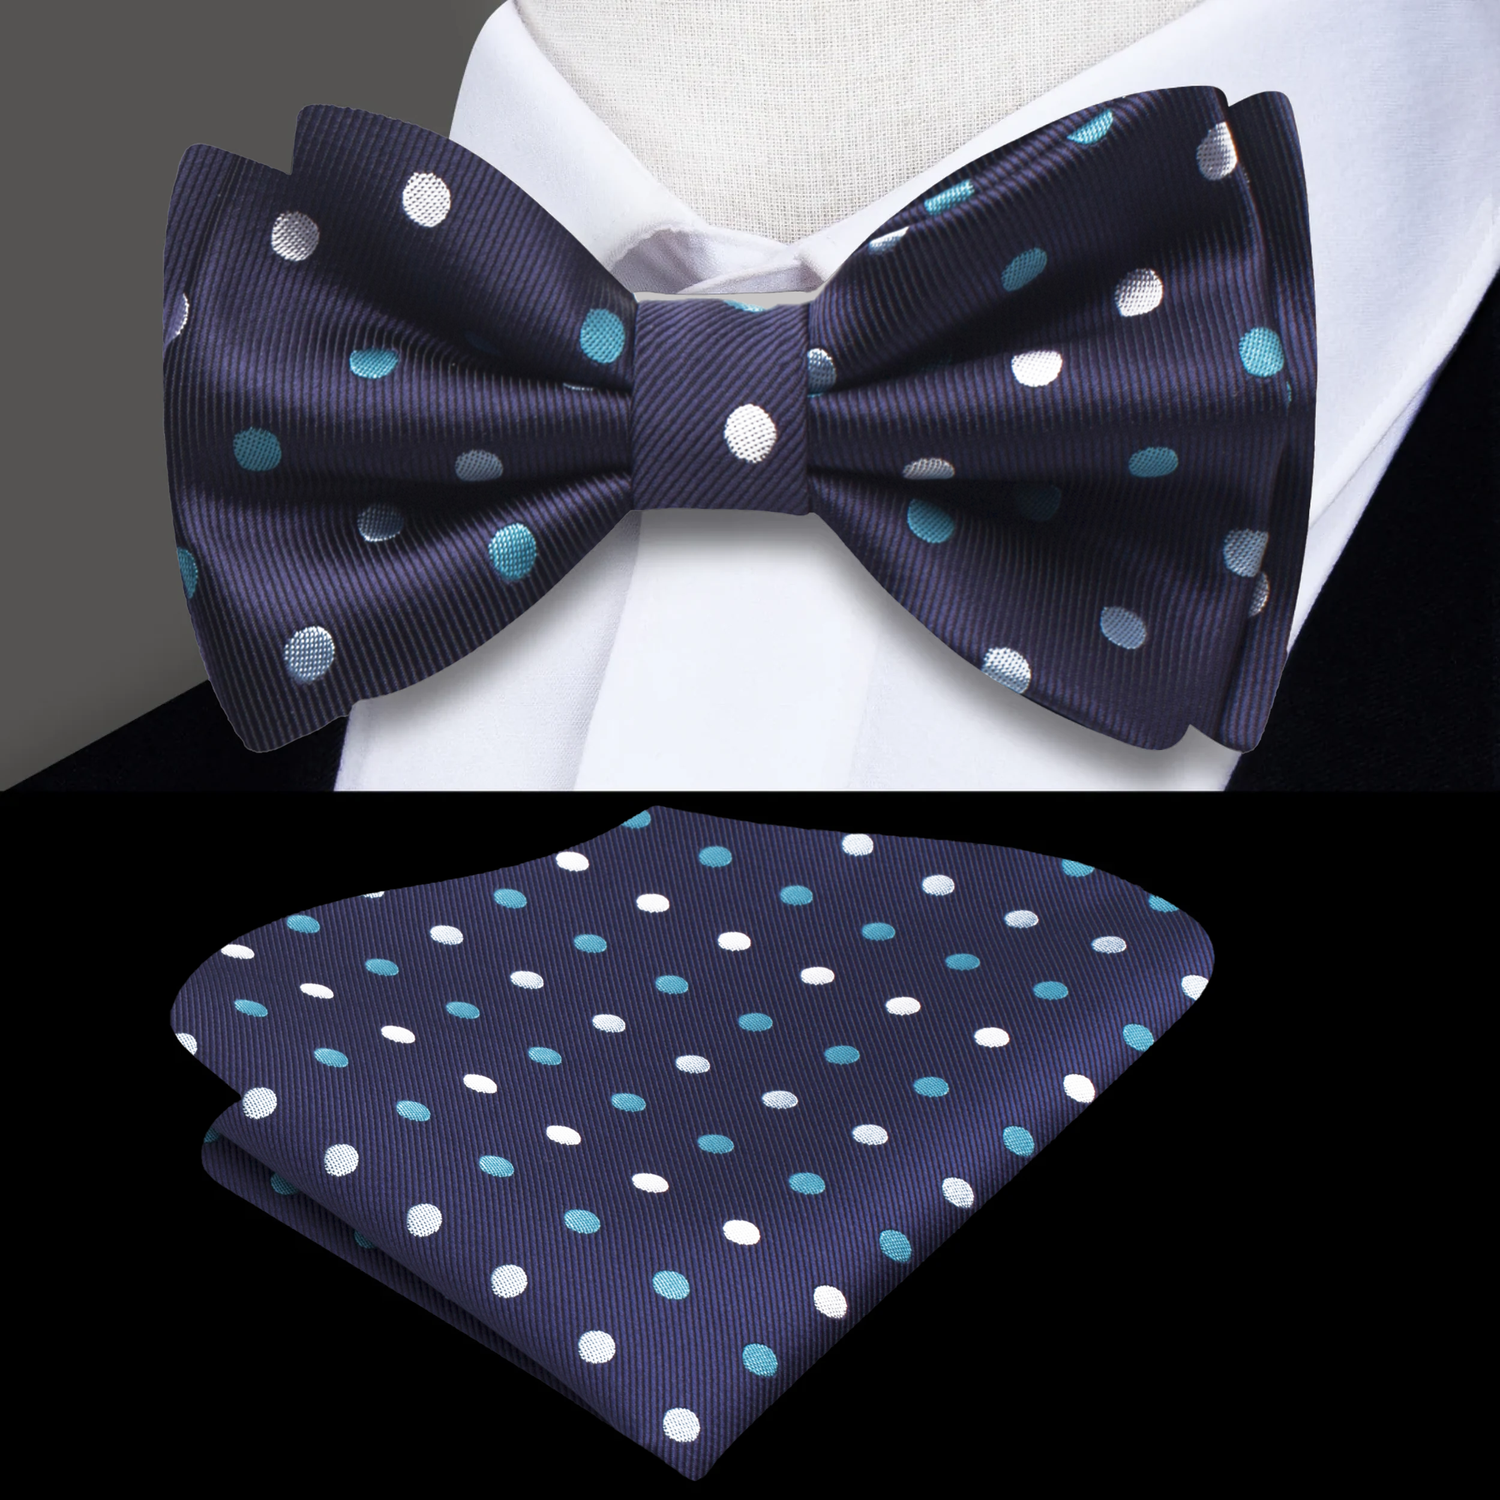 A Blue, White Polka Dot Pattern Self Tie Bow Tie, Matching Pocket Square